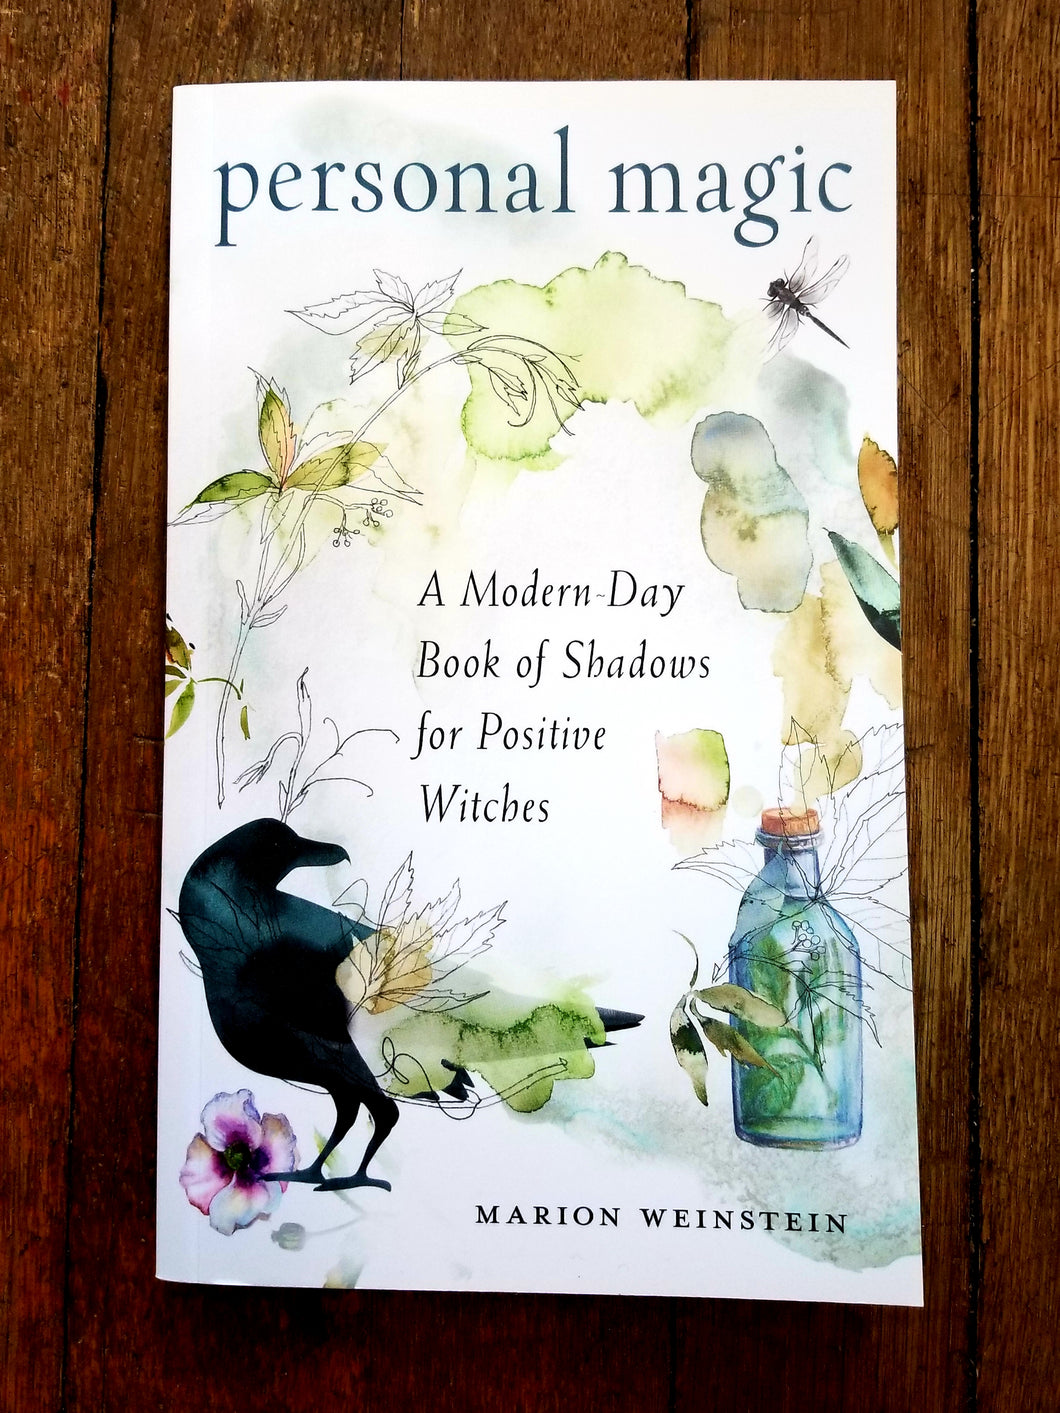 Personal Magic: A Modern-Day Book of Shadows for Positive Witches by Marion Weinstein